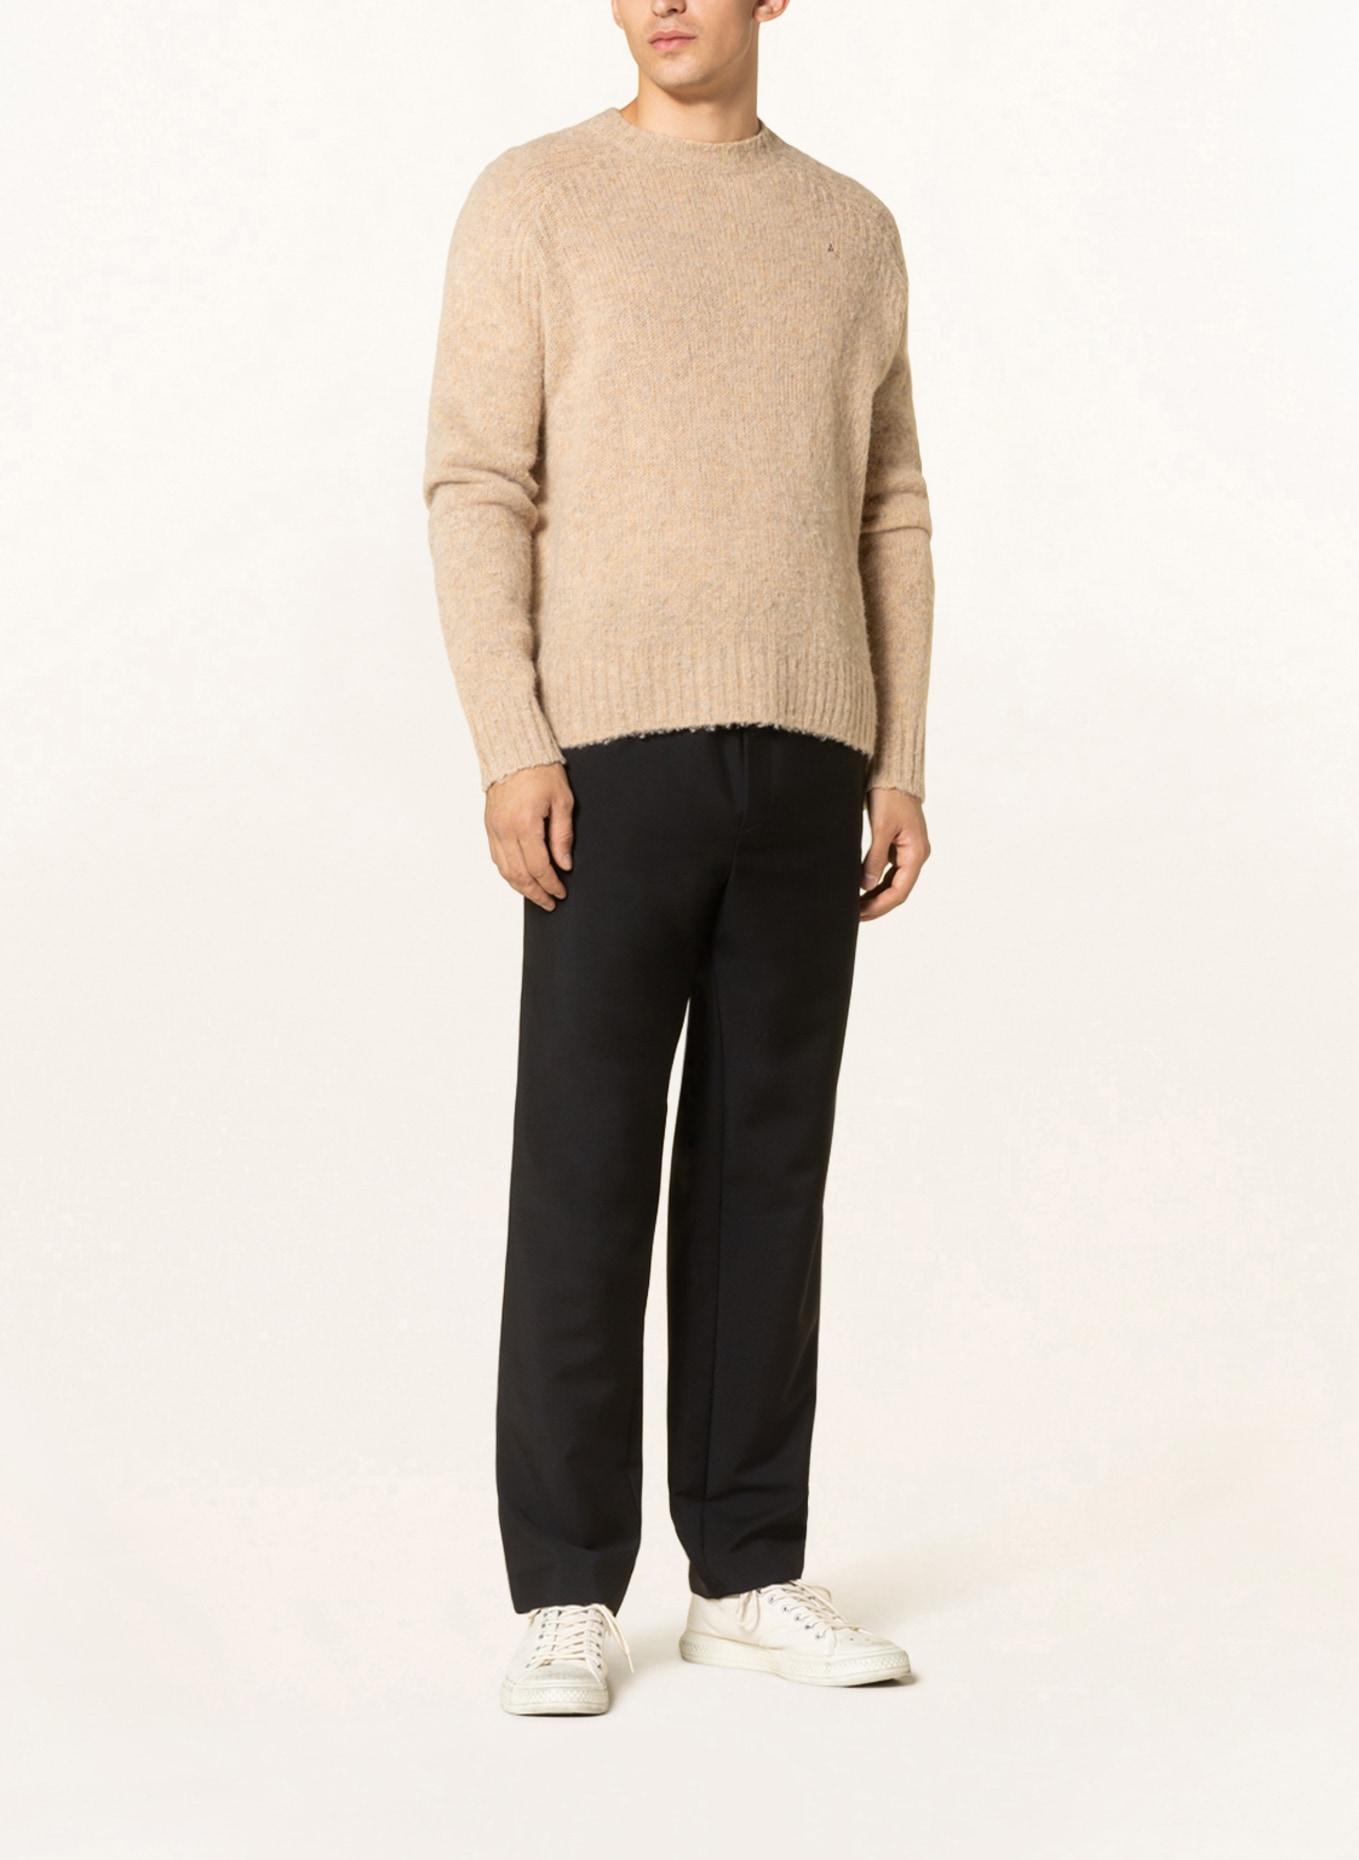 Acne Studios Pants in jogger style, Color: BLACK (Image 2)